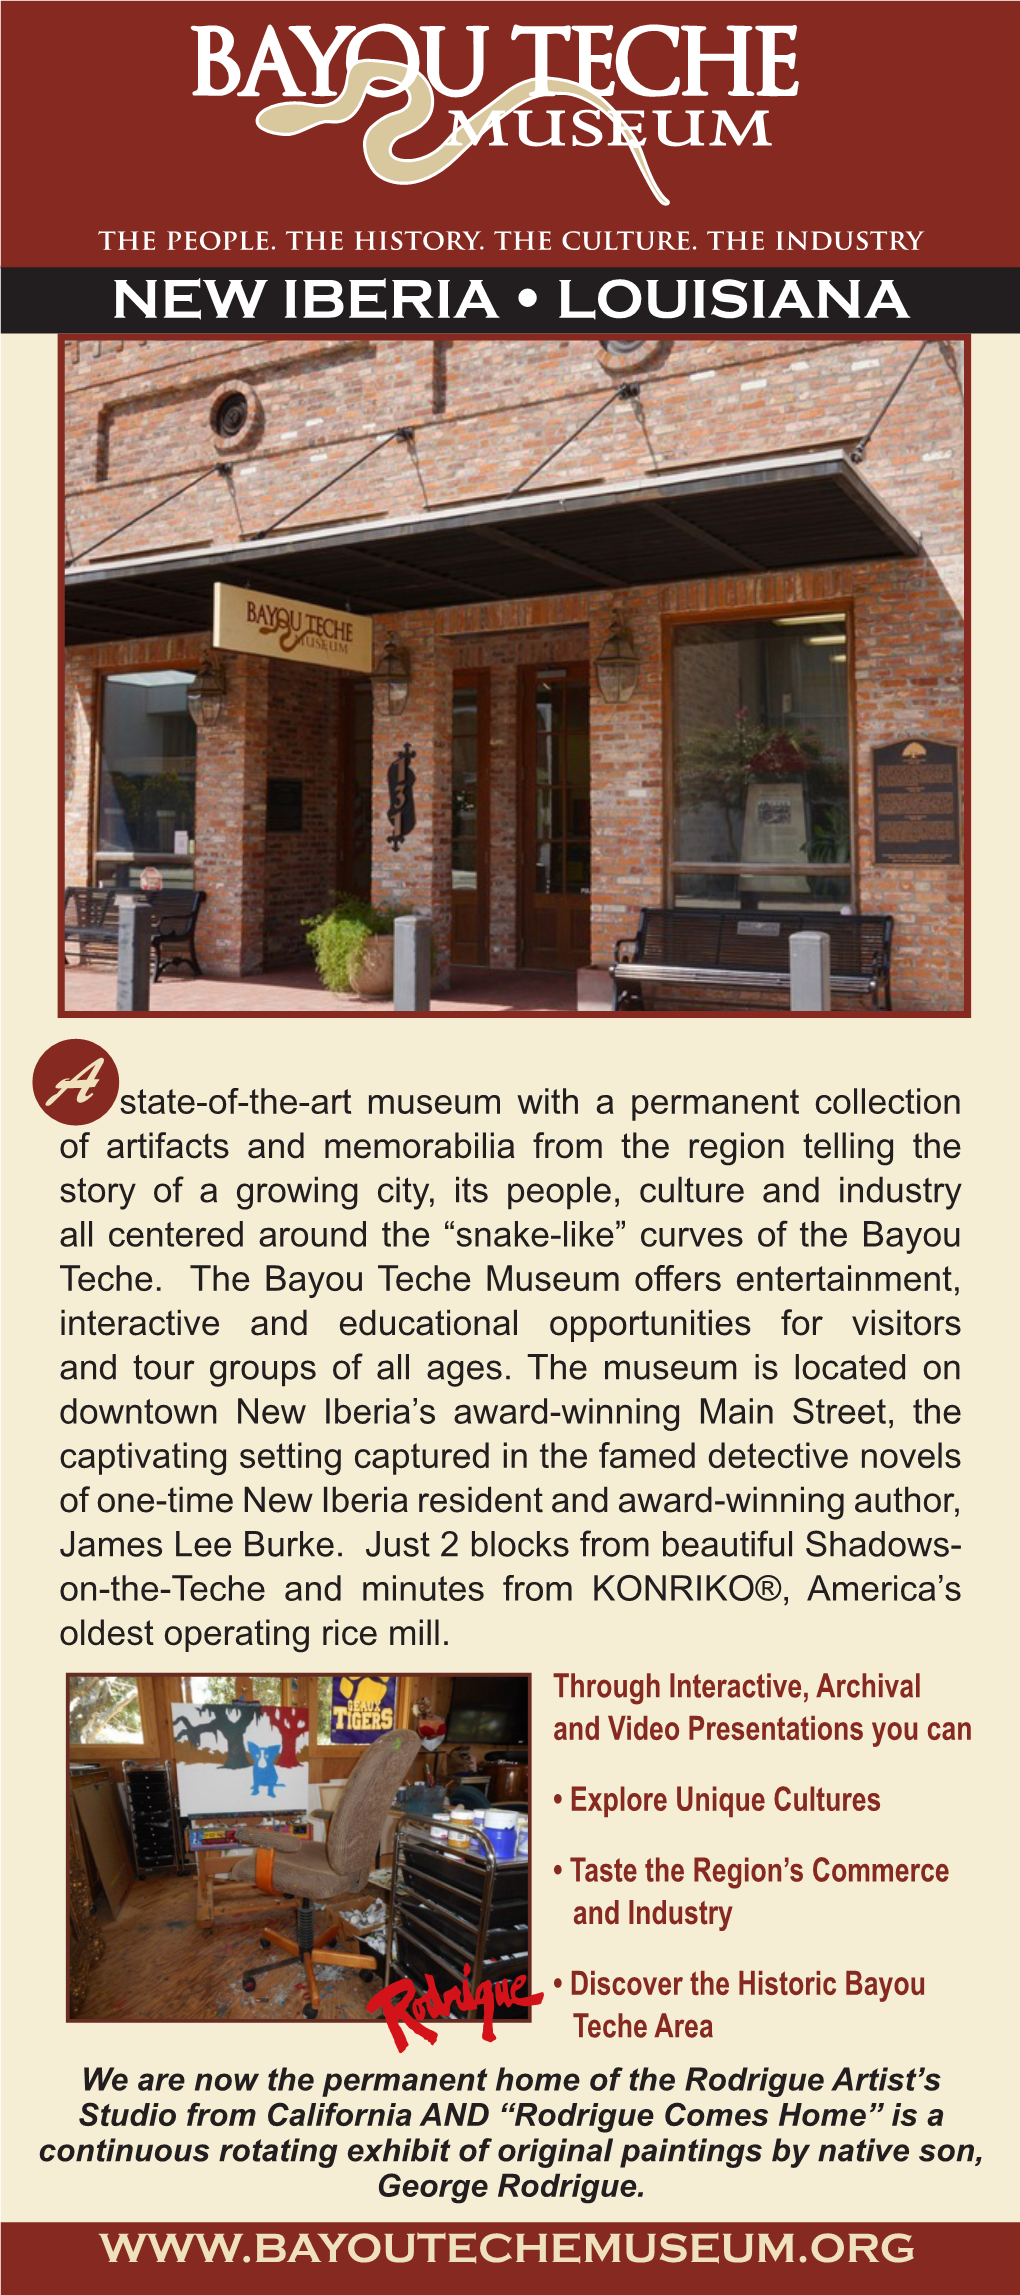 Bayou Teche Museum Offers Entertainment, Interactive and Educational Opportunities for Visitors and Tour Groups of All Ages